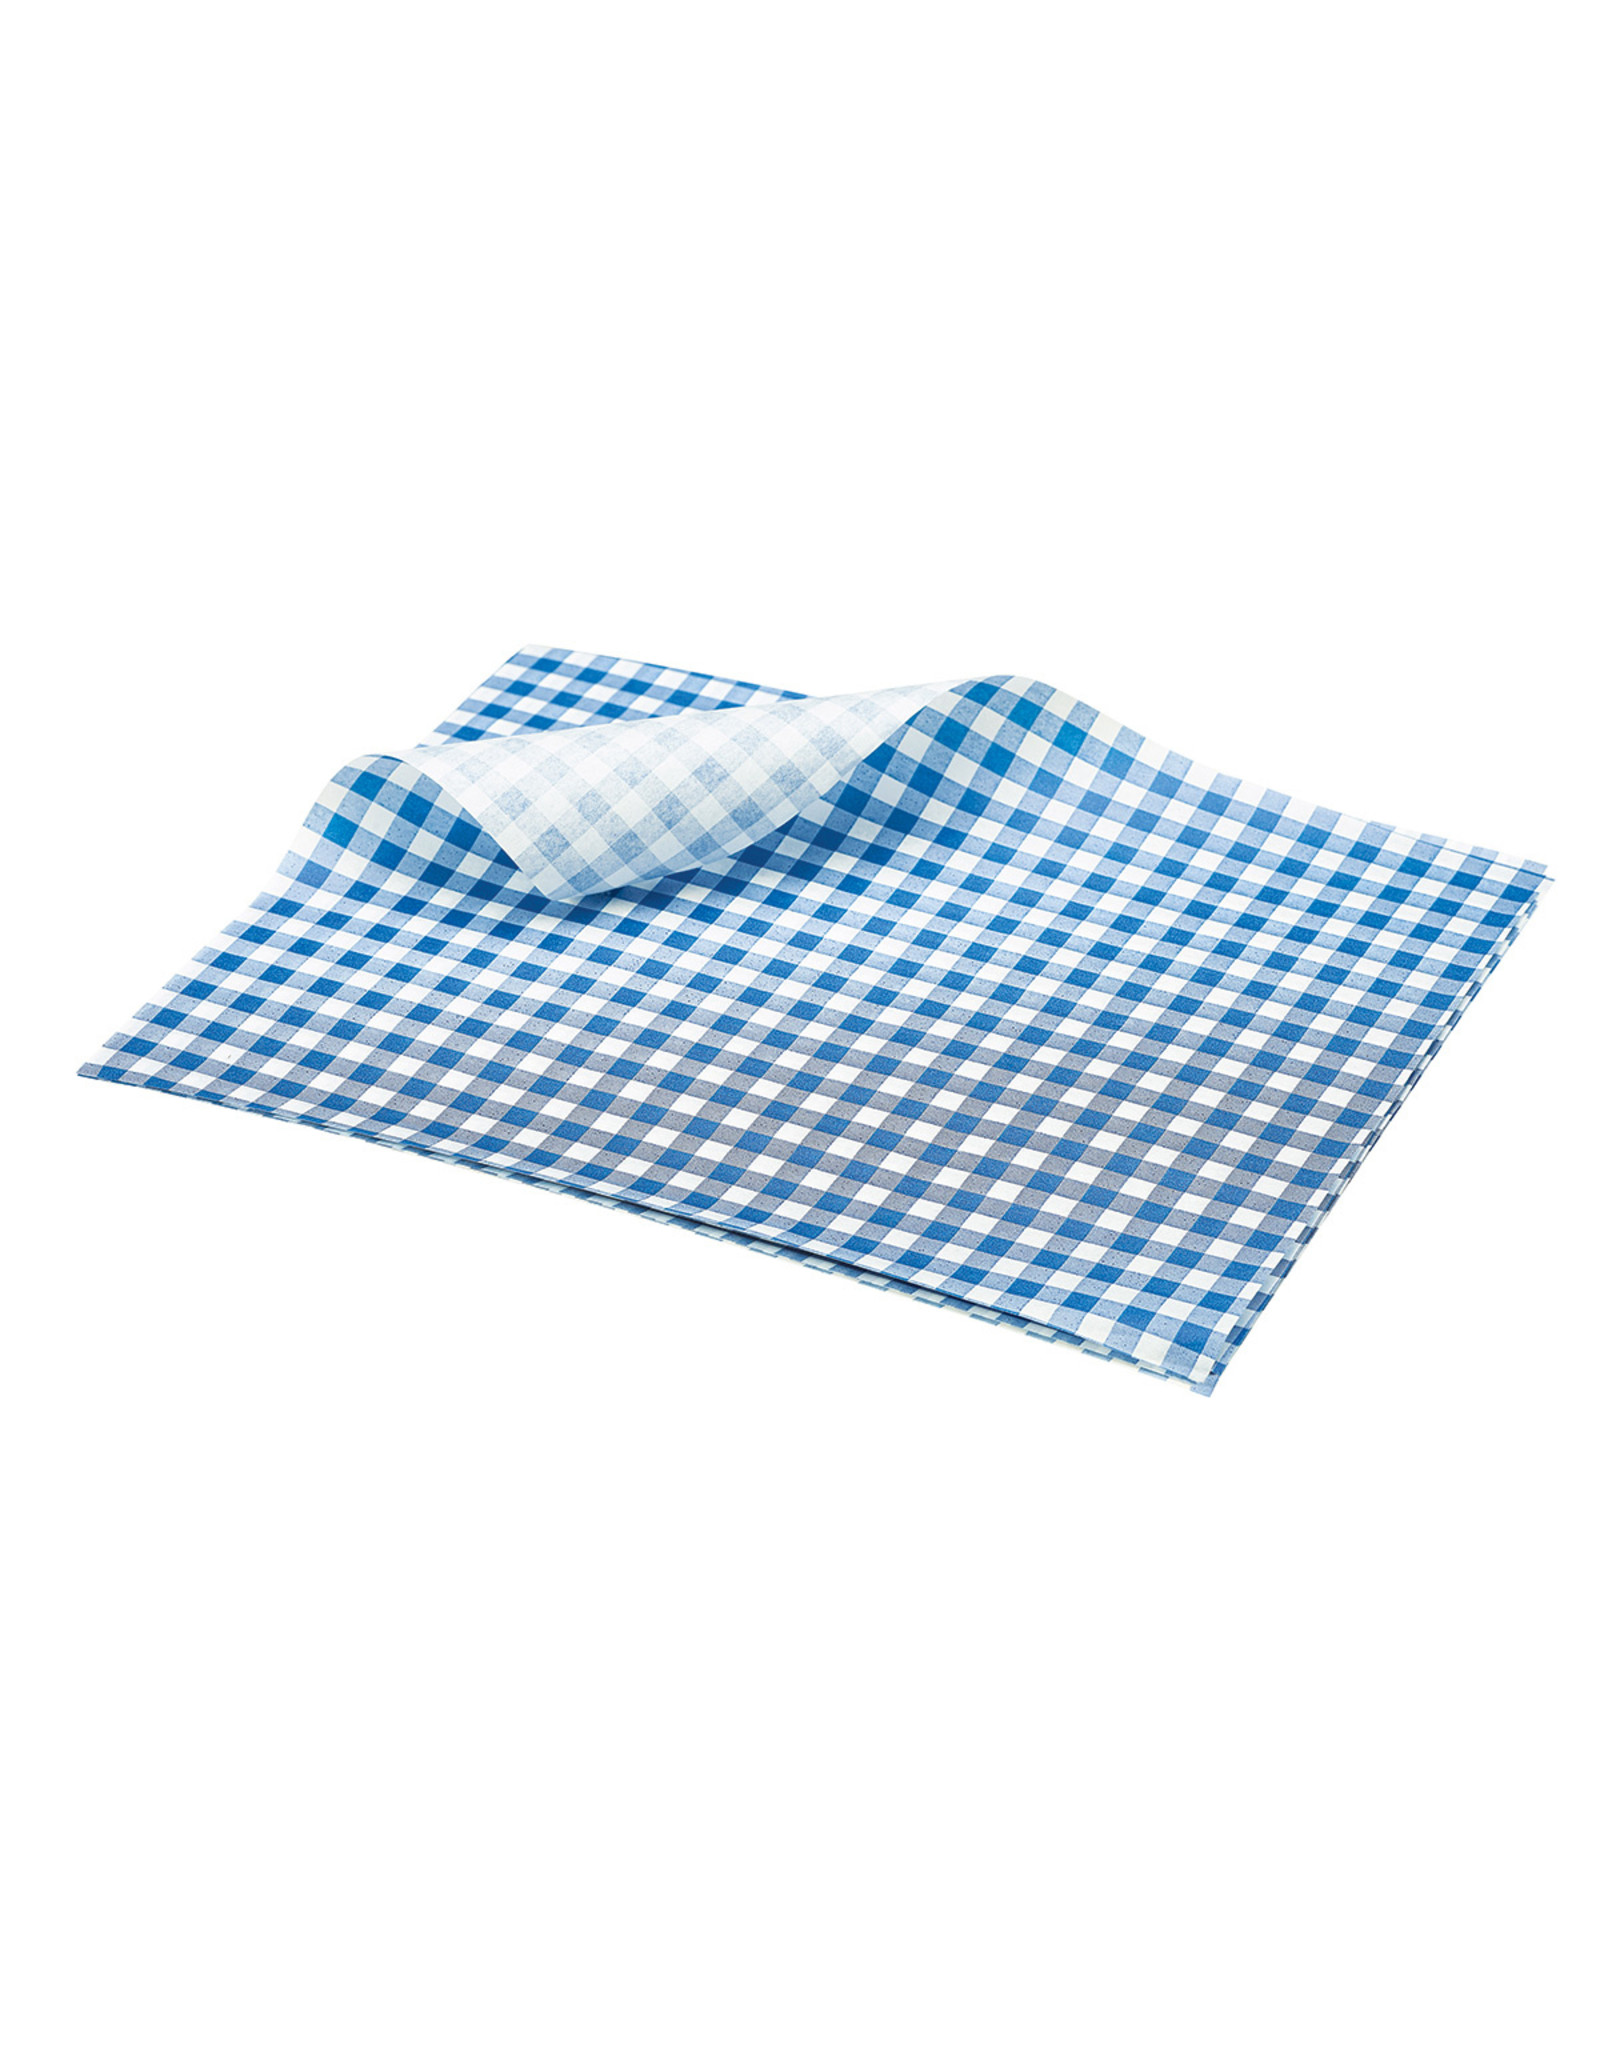 Stylepoint Greaseproof paper blue gingham 25 x 20 cm 1000pcs